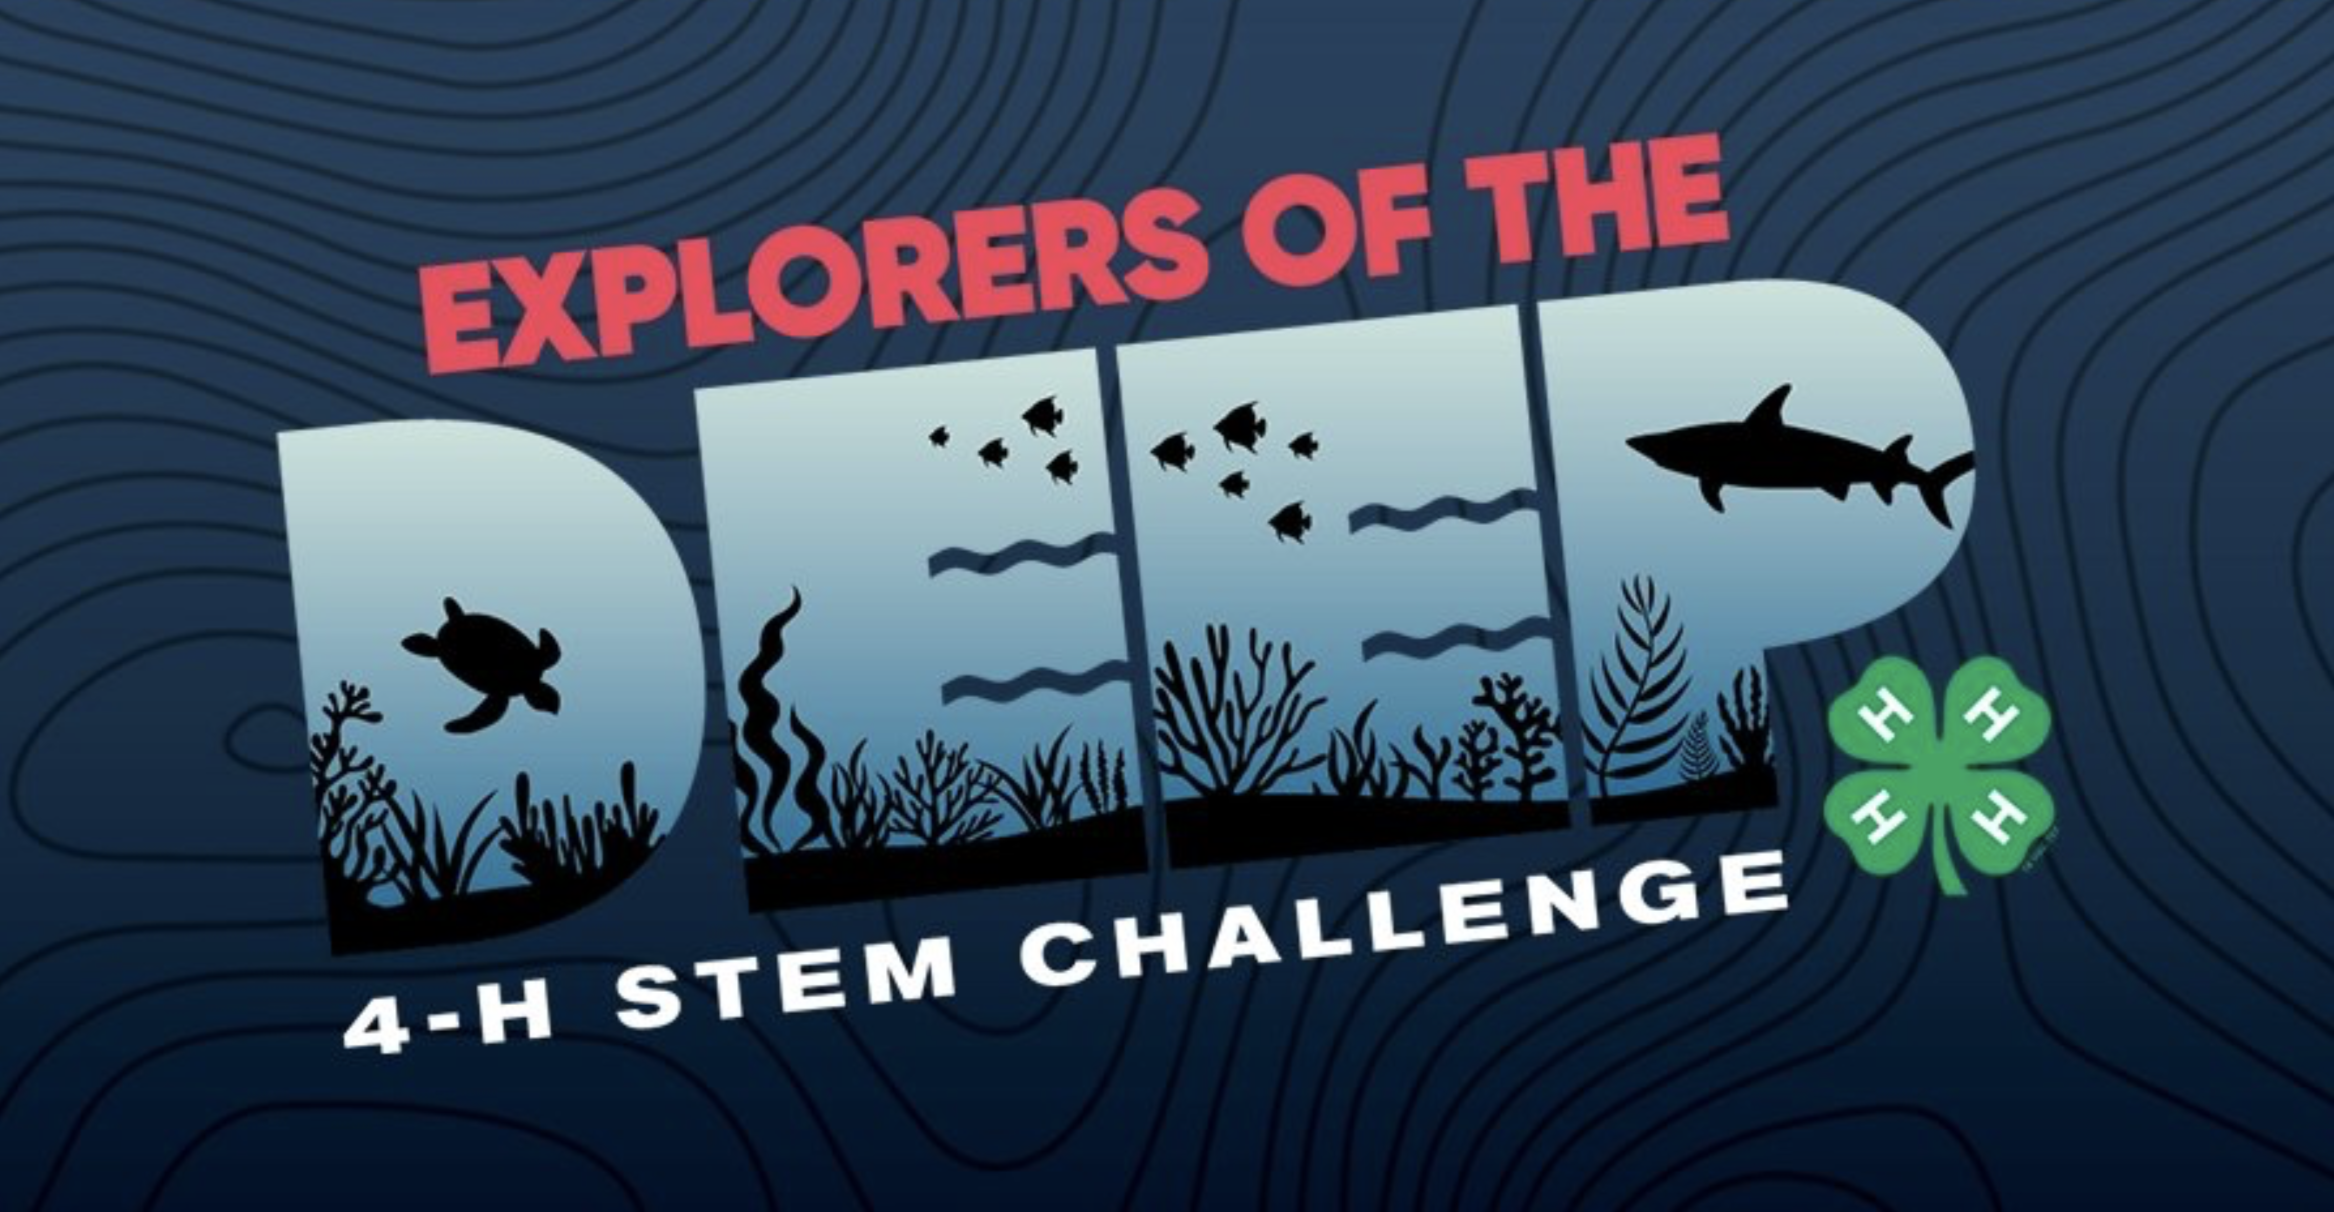 Explorers of the Deep: 4-H STEM Challenge graphic with sea floor scape and clover emblem